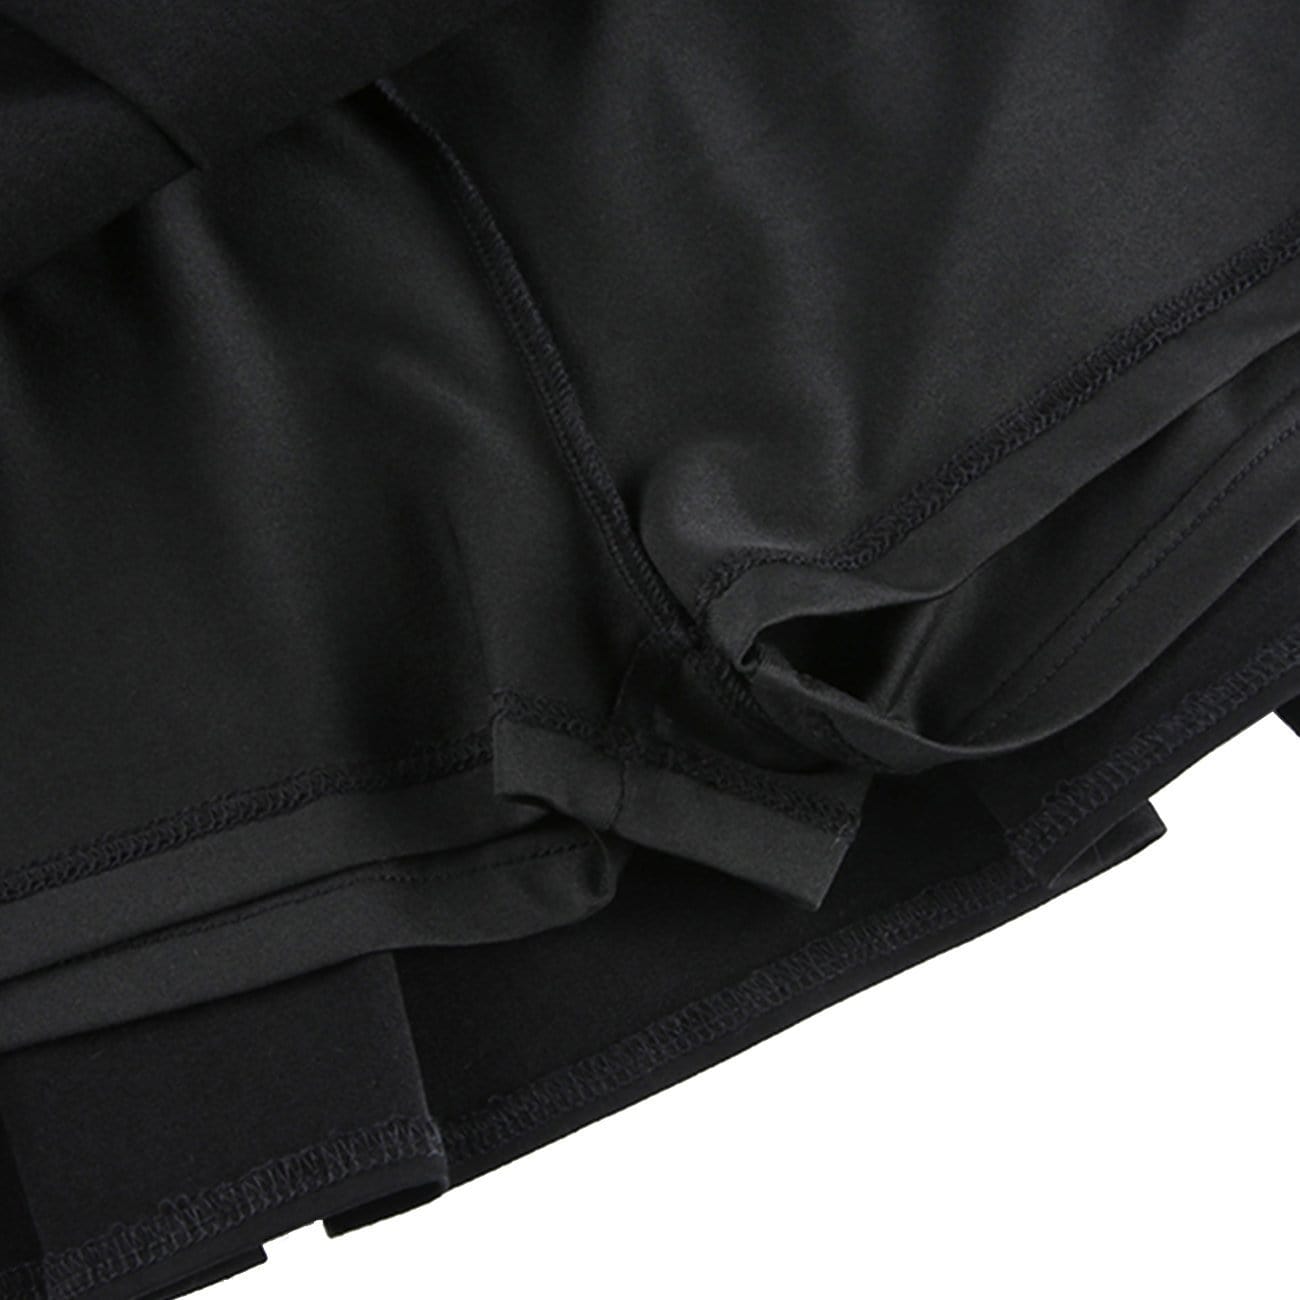 Dark Babes High-waisted Leather Pleated Skirt Streetwear Brand Techwear Combat Tactical YUGEN THEORY